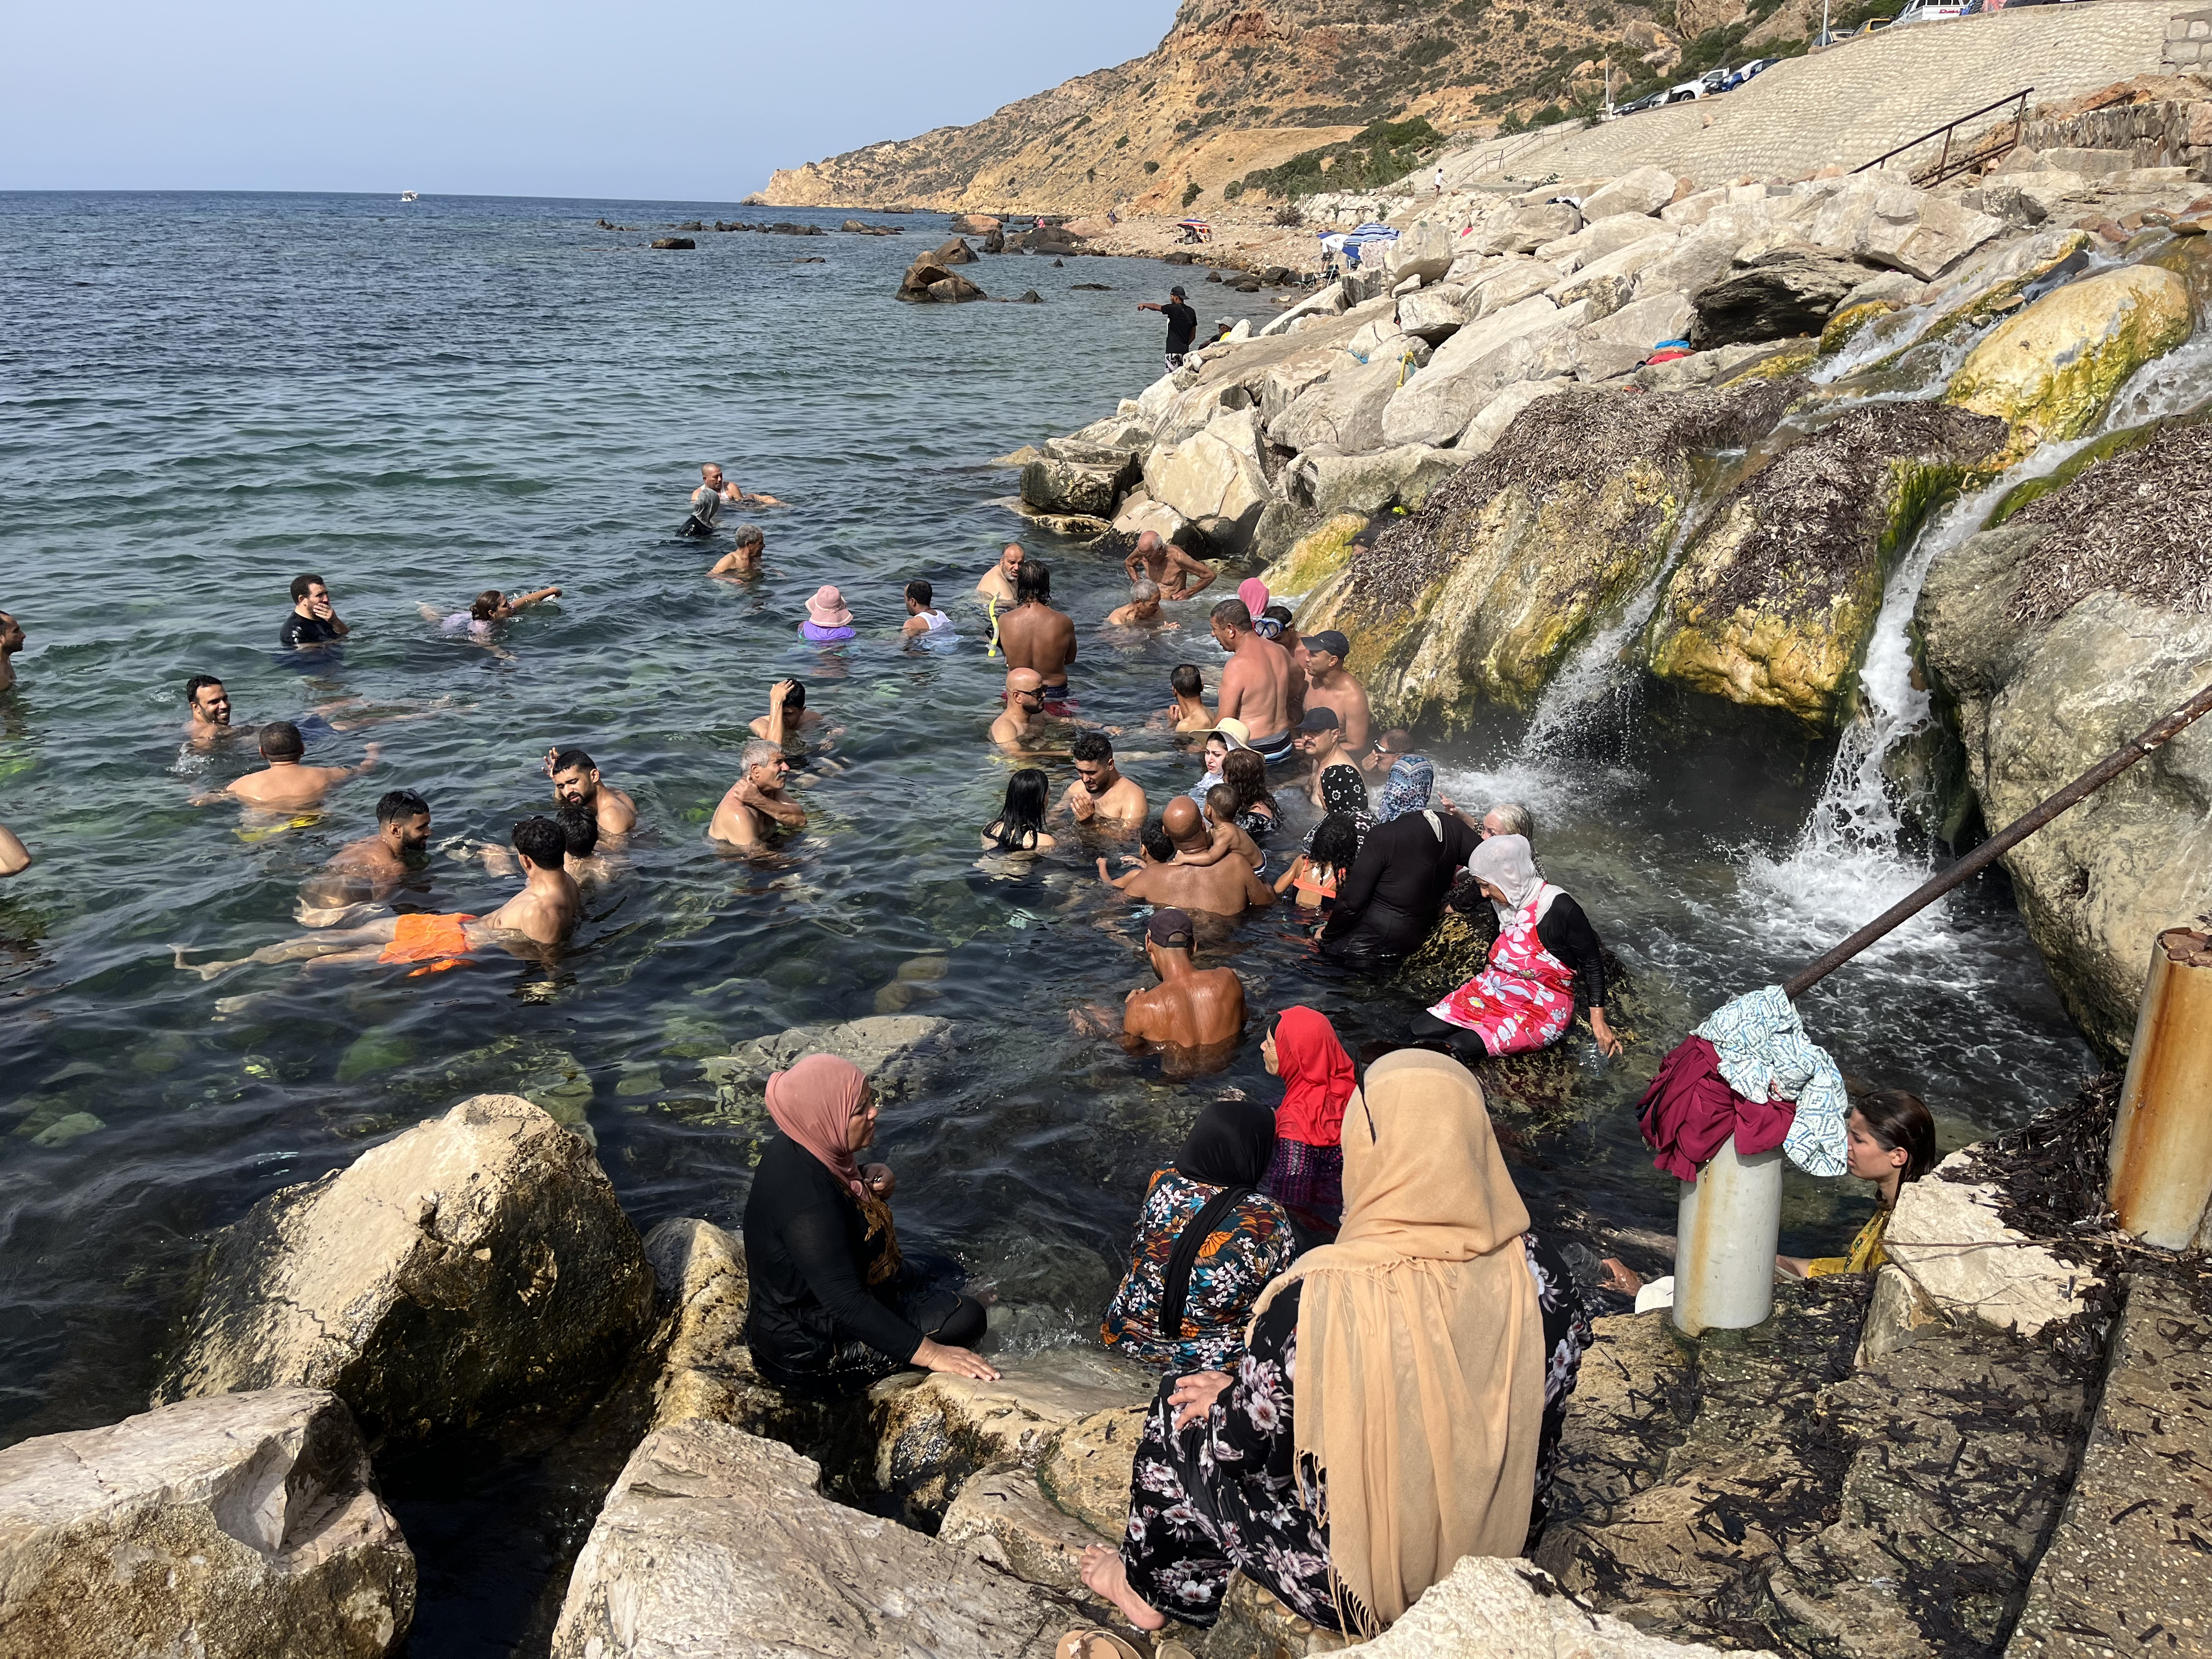 A crowd of people swimming in the sea, next to a waterfall